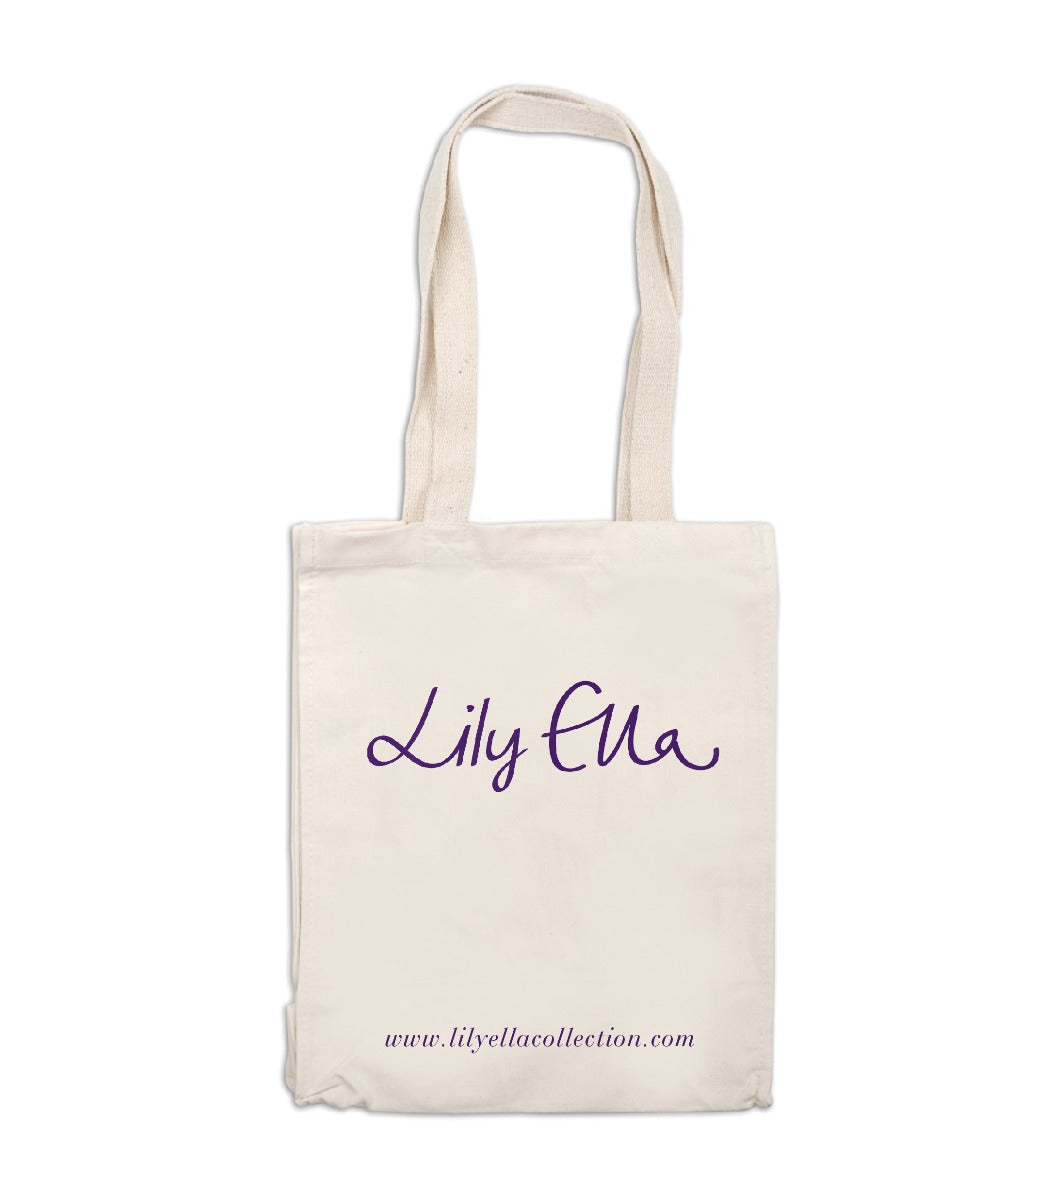 Lily Ella Collection classic beige cotton tote bag with purple logo, stylish everyday accessory for women's fashion, eco-friendly reusable shopping bag.